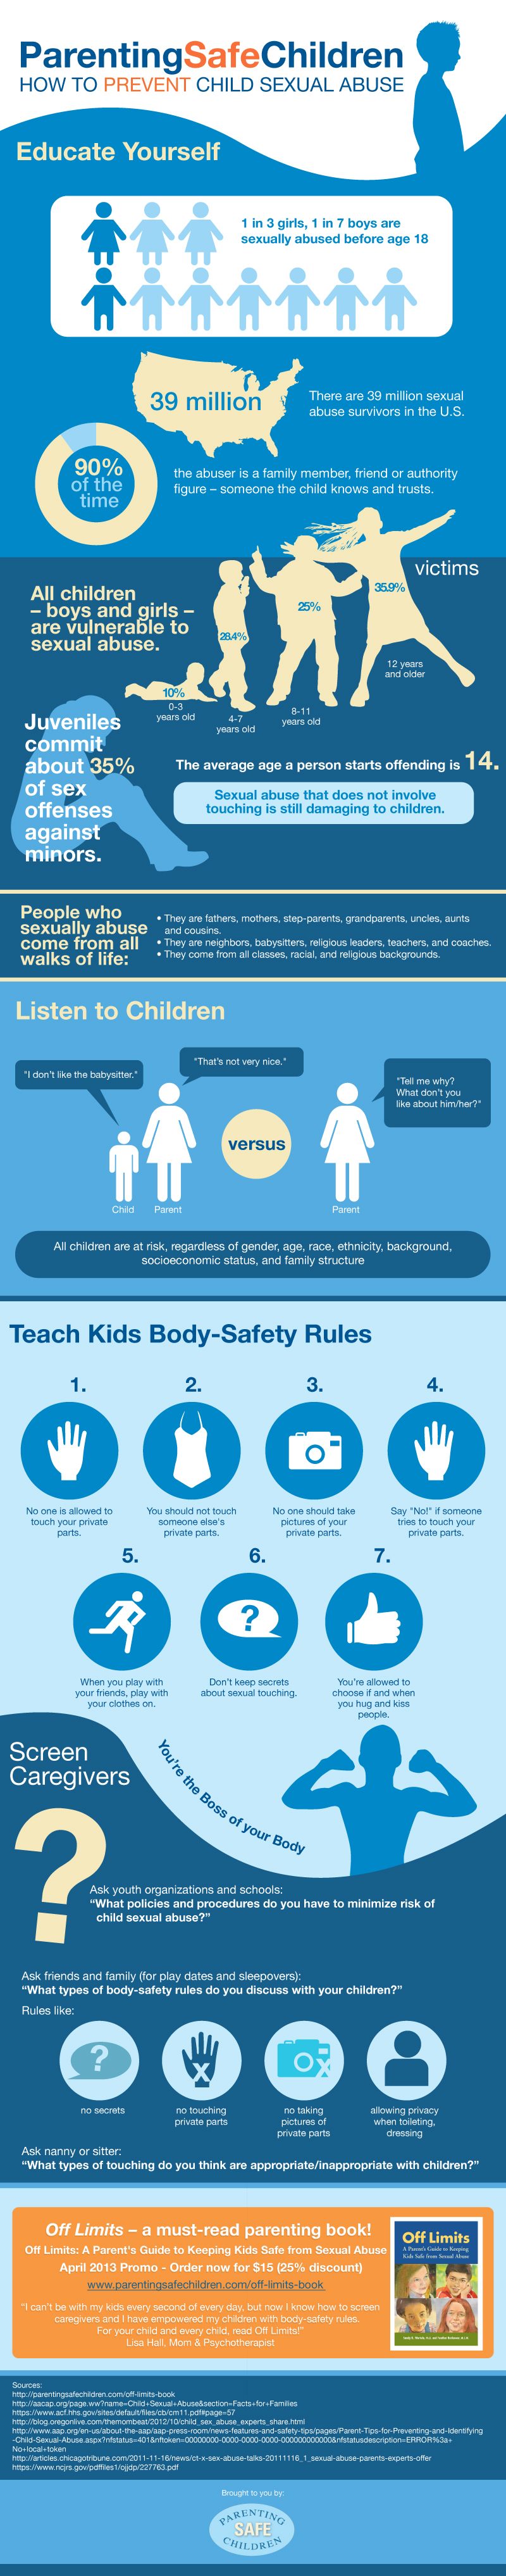 How to Prevent Child Sexual Abuse 